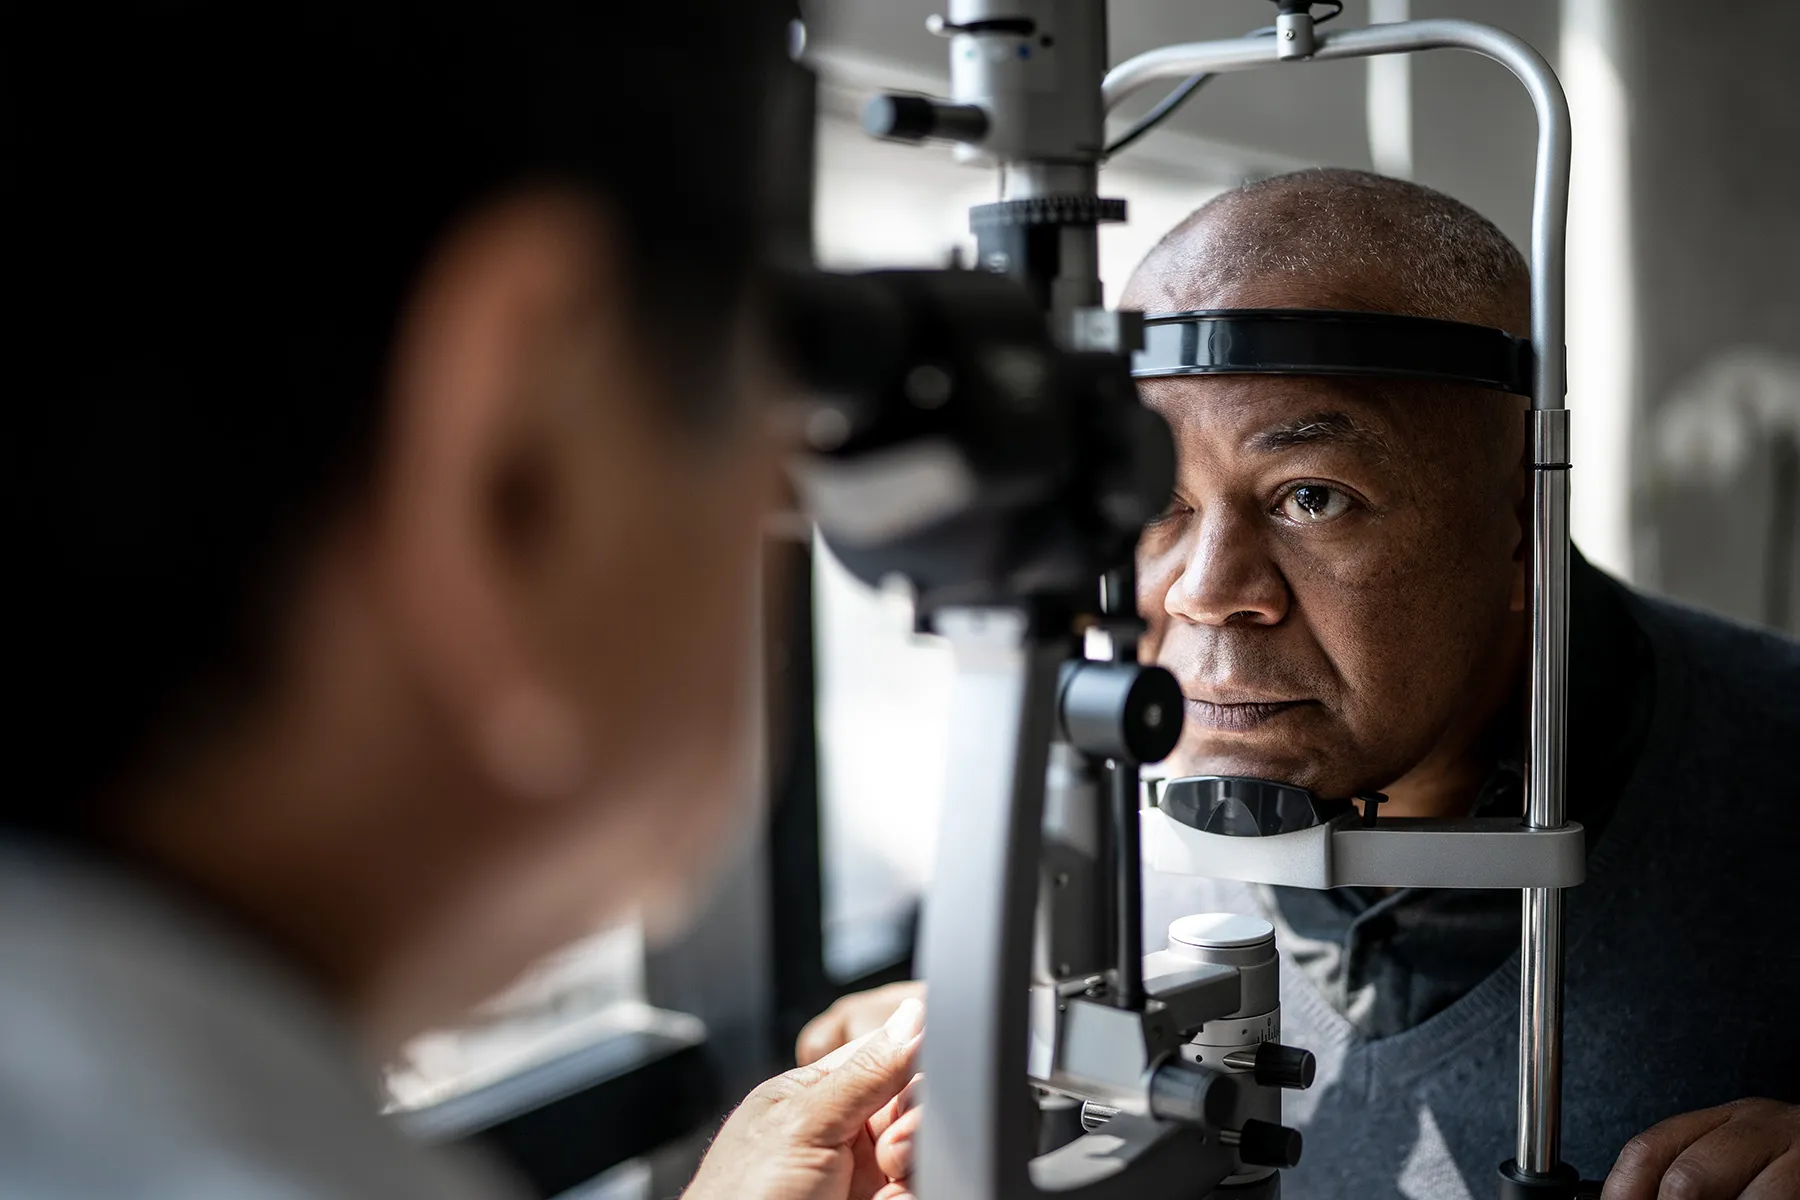 A Hidden Threat to Vision Health Rising Swiftly